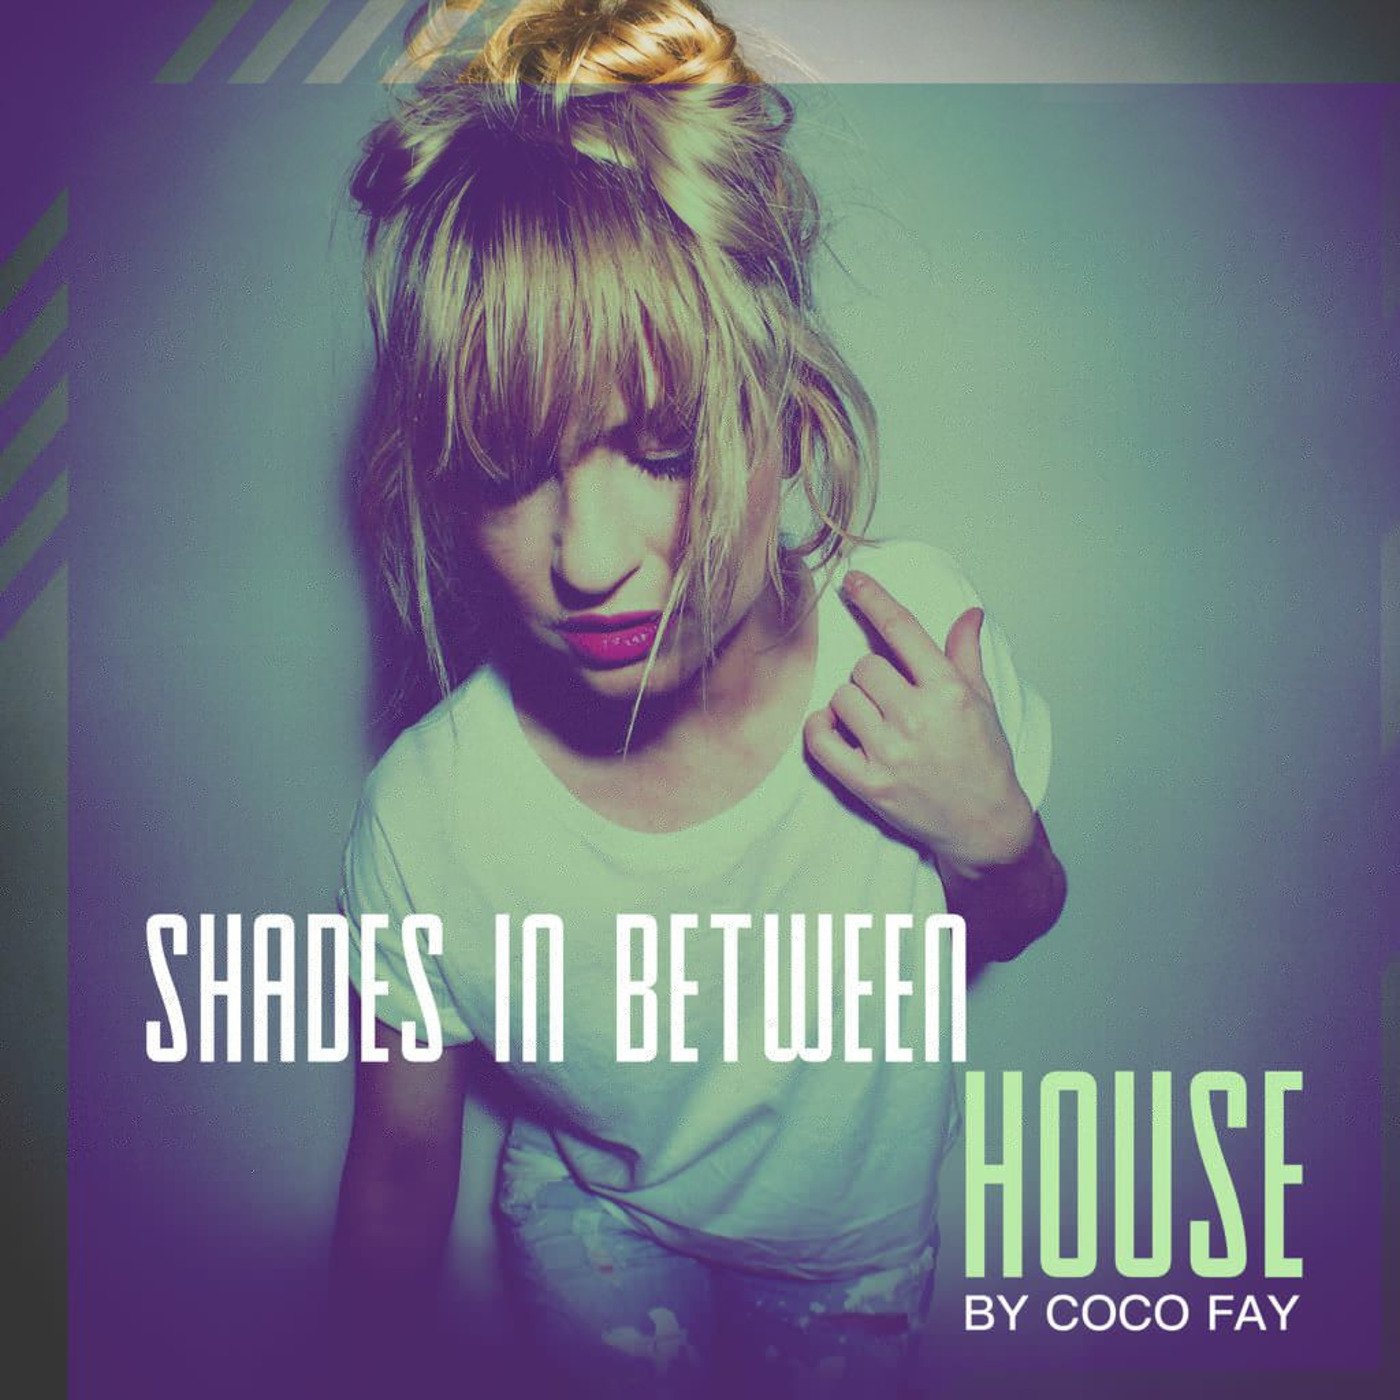 Shades of House Music #006 by Coco Fay